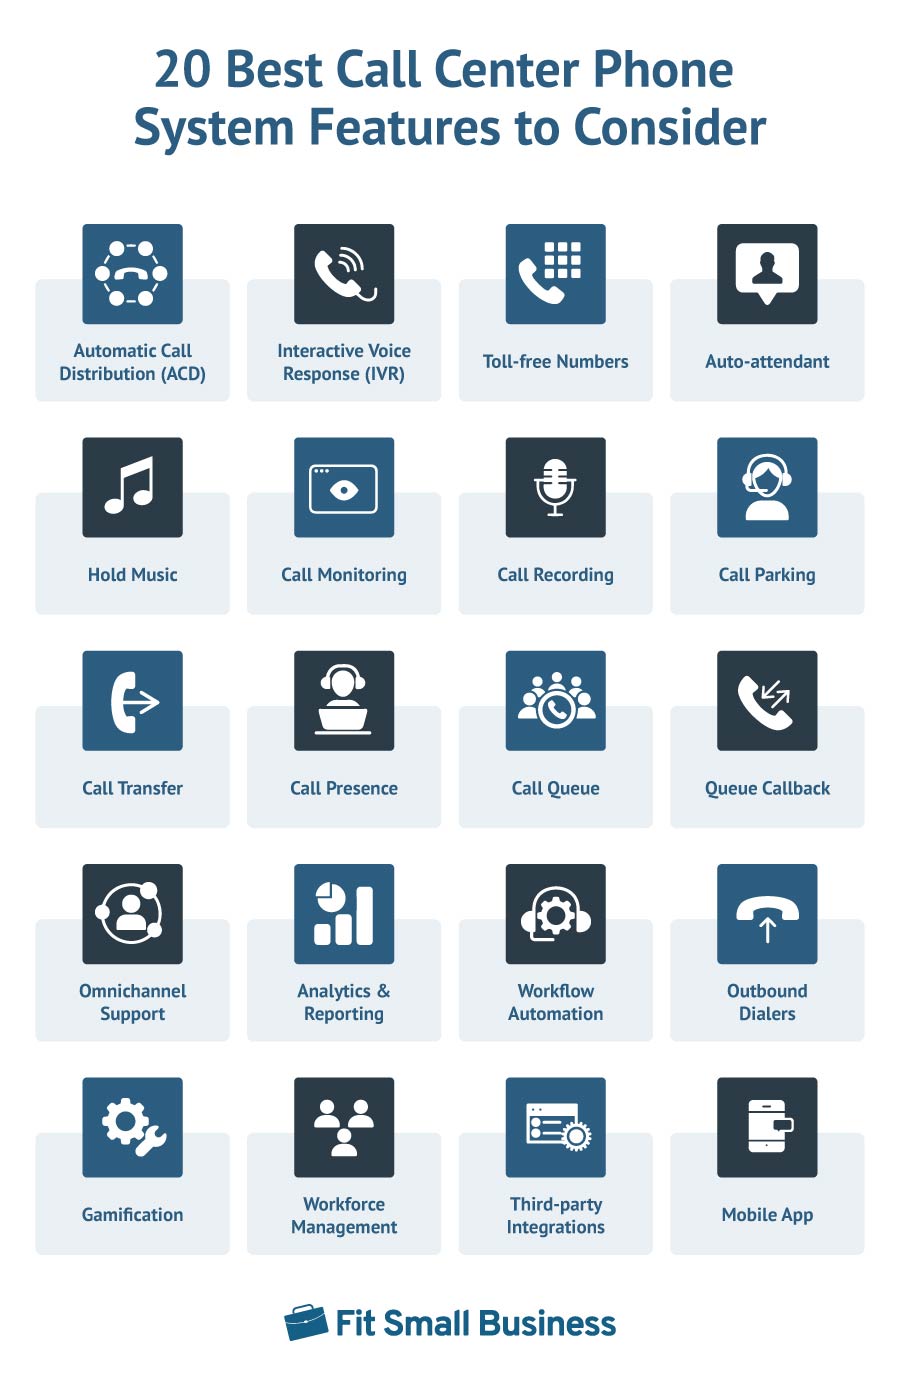 An infographic listing the top 20 call center system features.